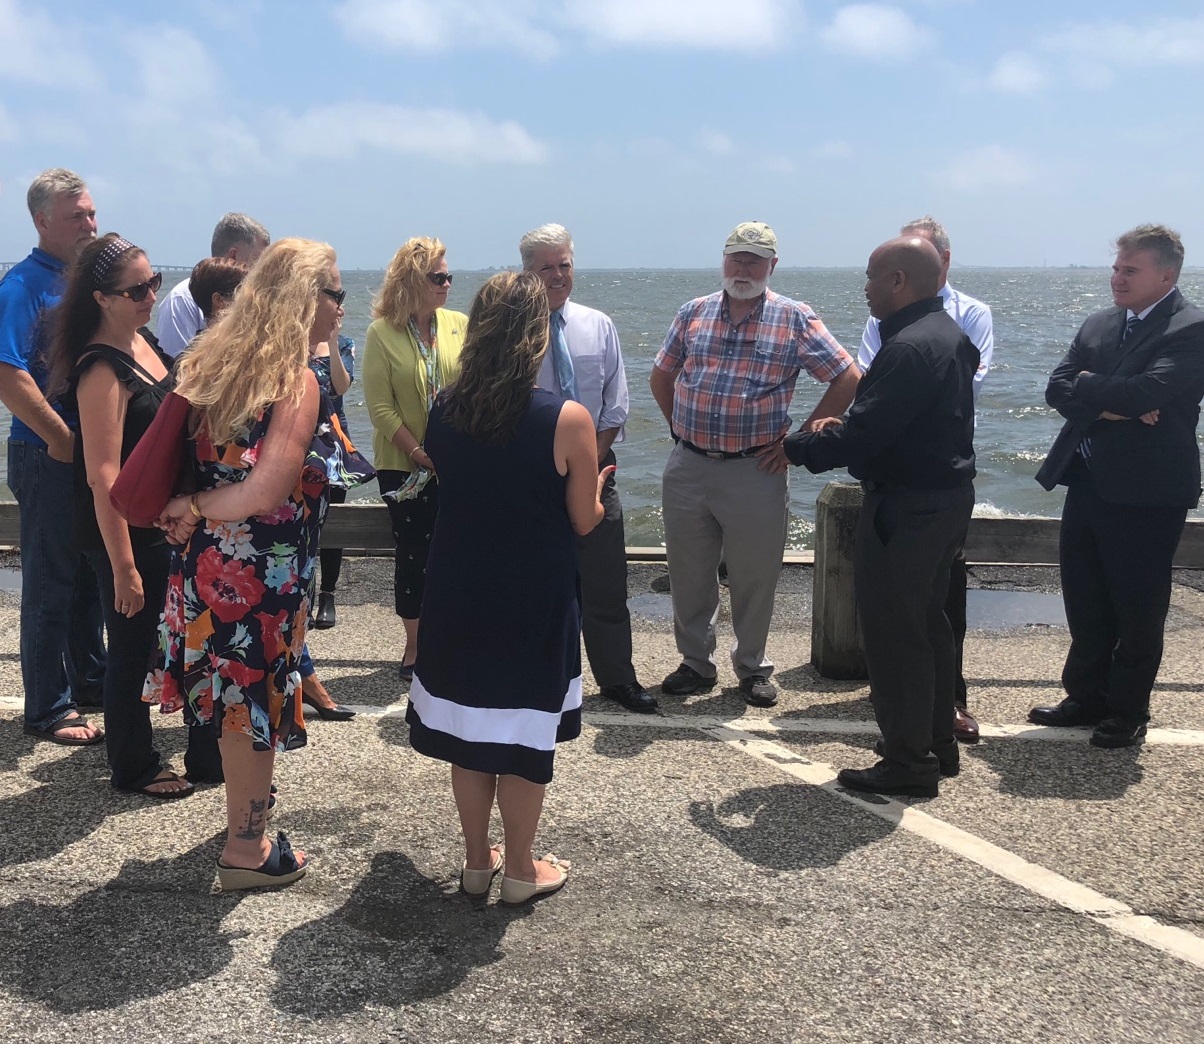 Pictured with Speaker Heastie in the second photo at the Babylon Village Main Docks (from left to right): marine scientists and members of local non-profits, Assemblymember Christine Pellegrino, Suffolk County Executive Steve Bellone and Dr. Malcolm Bowma